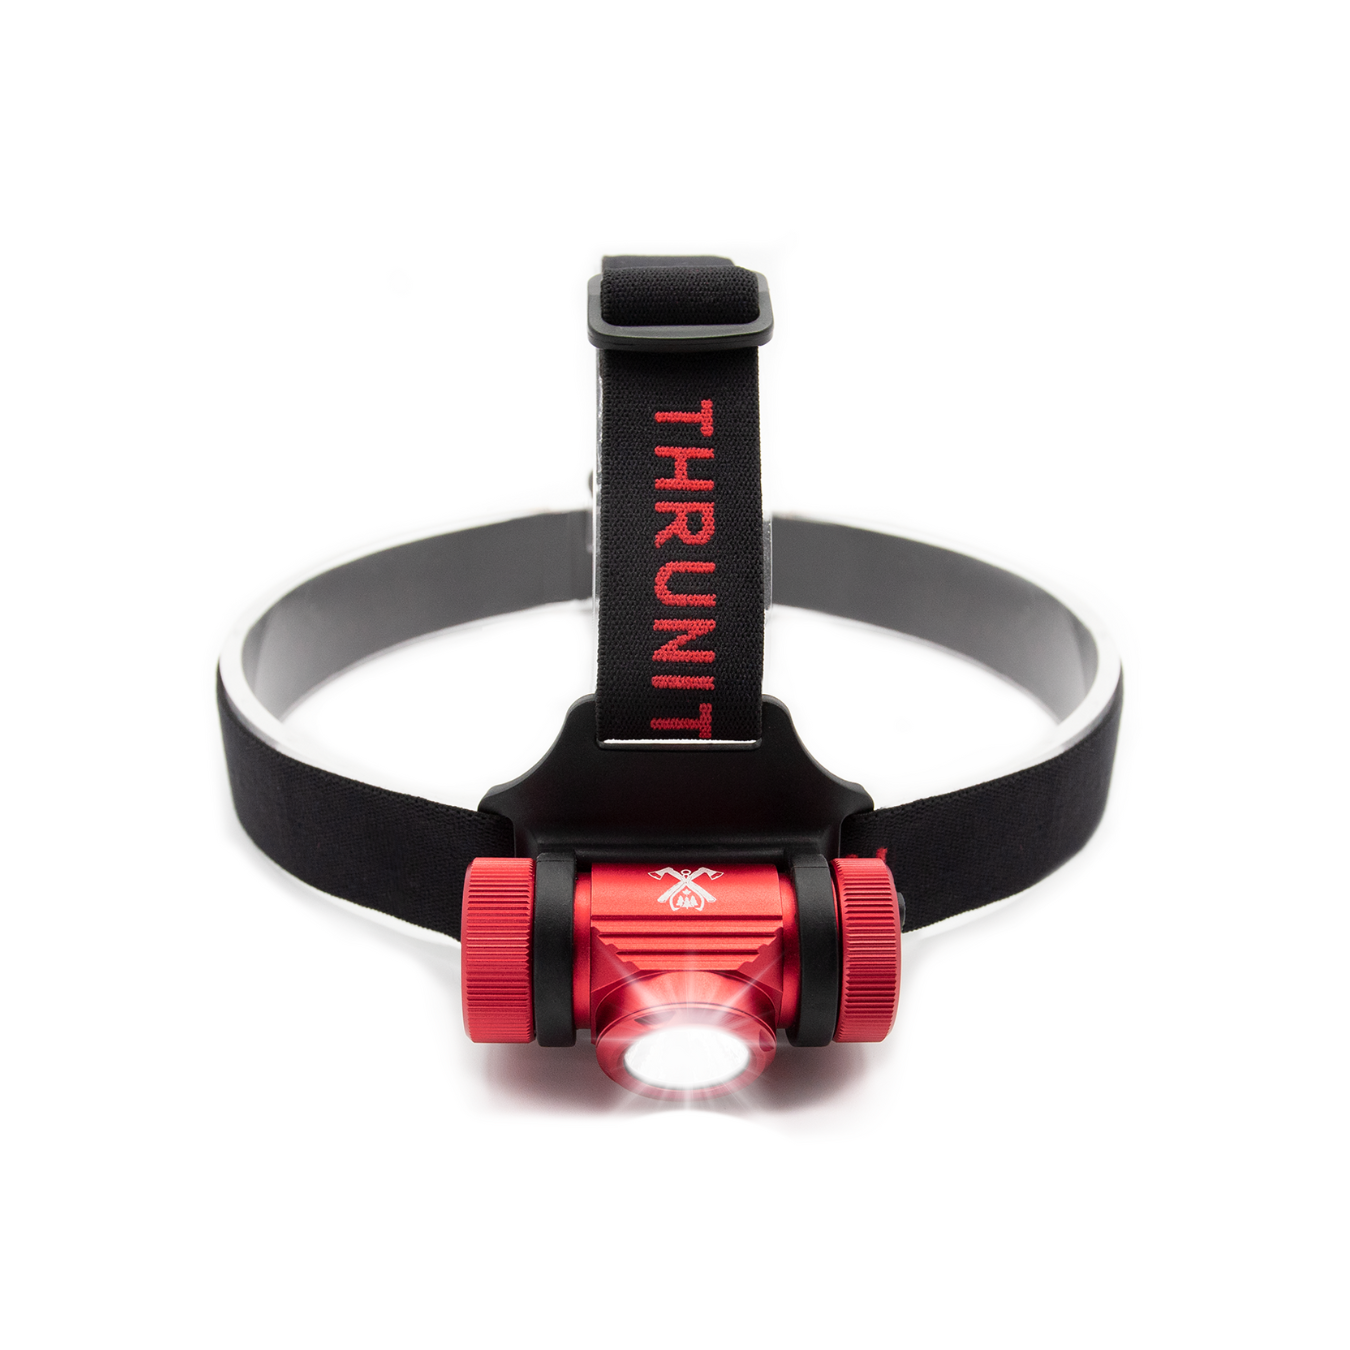 ThruNite TH02 CREE XHP50 NW LED 1500L Rechargeable Headlamp